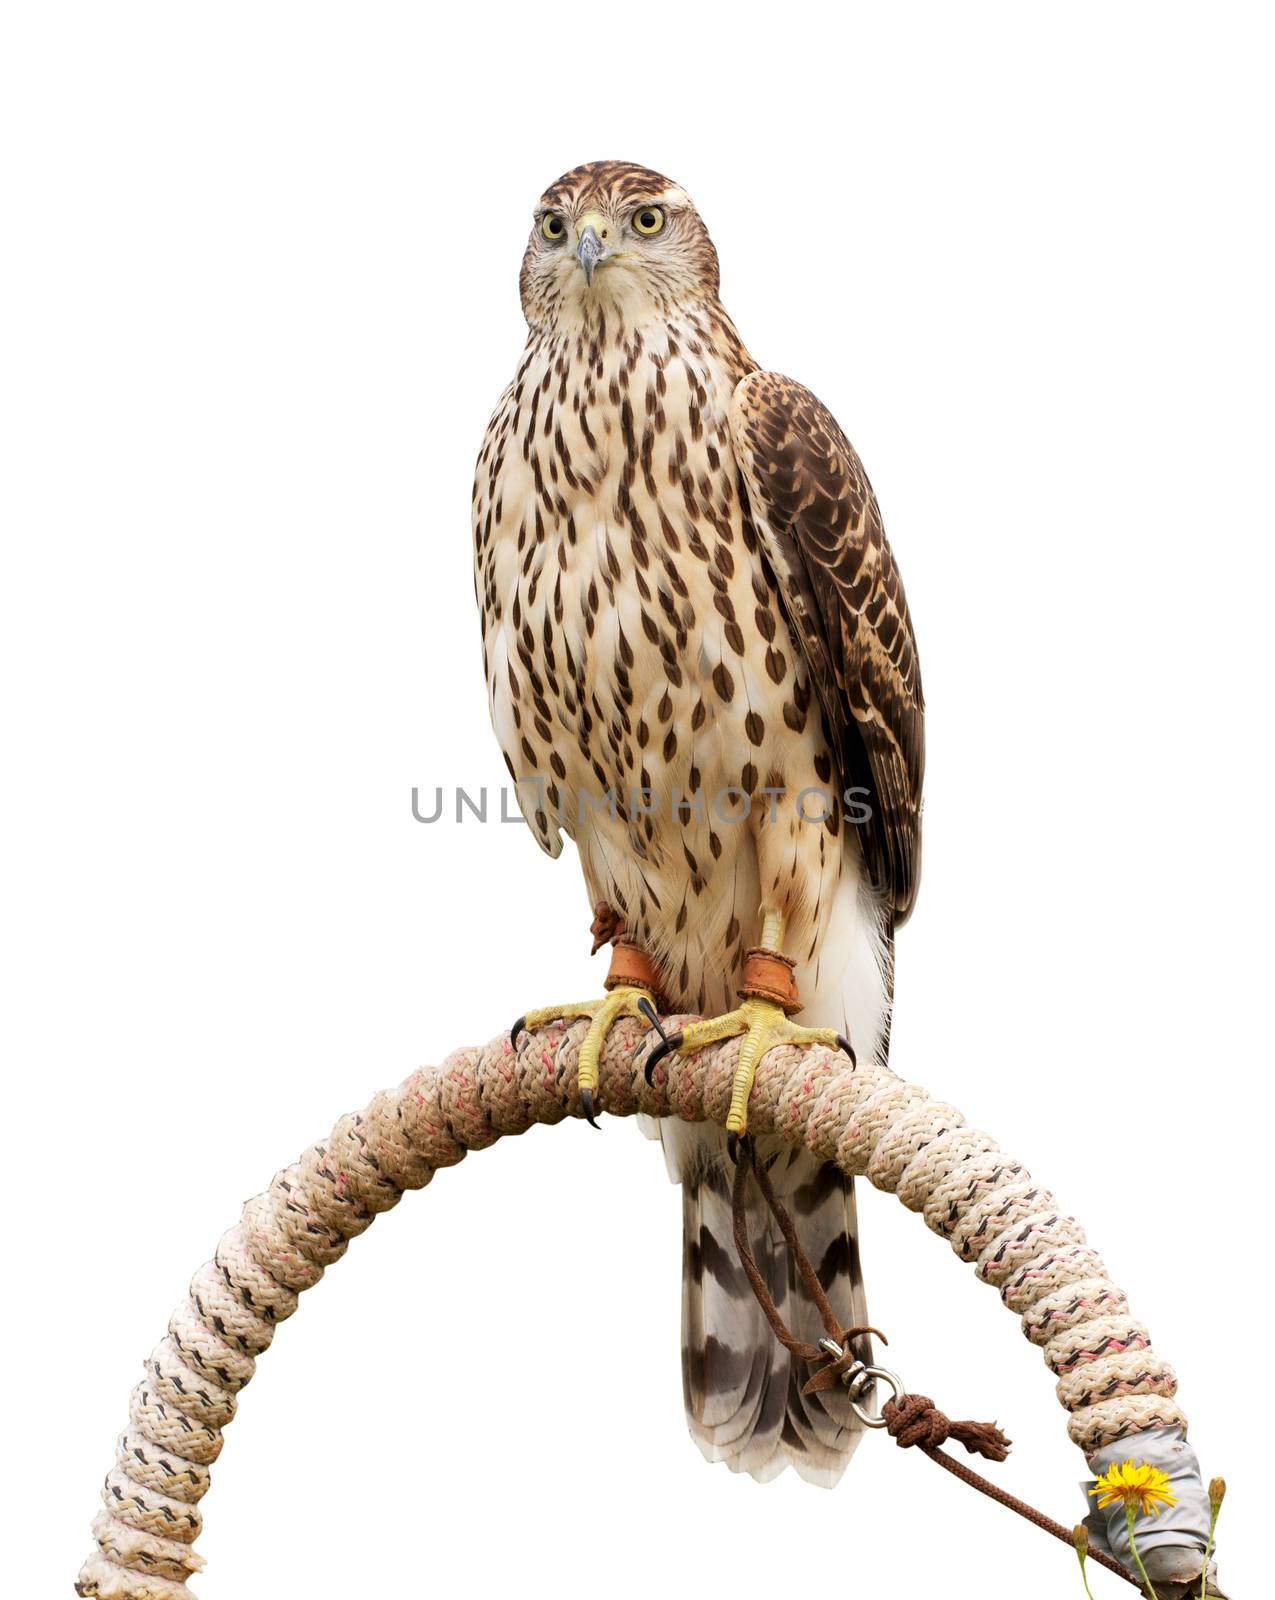 Falcon sitting on support, isolated on white